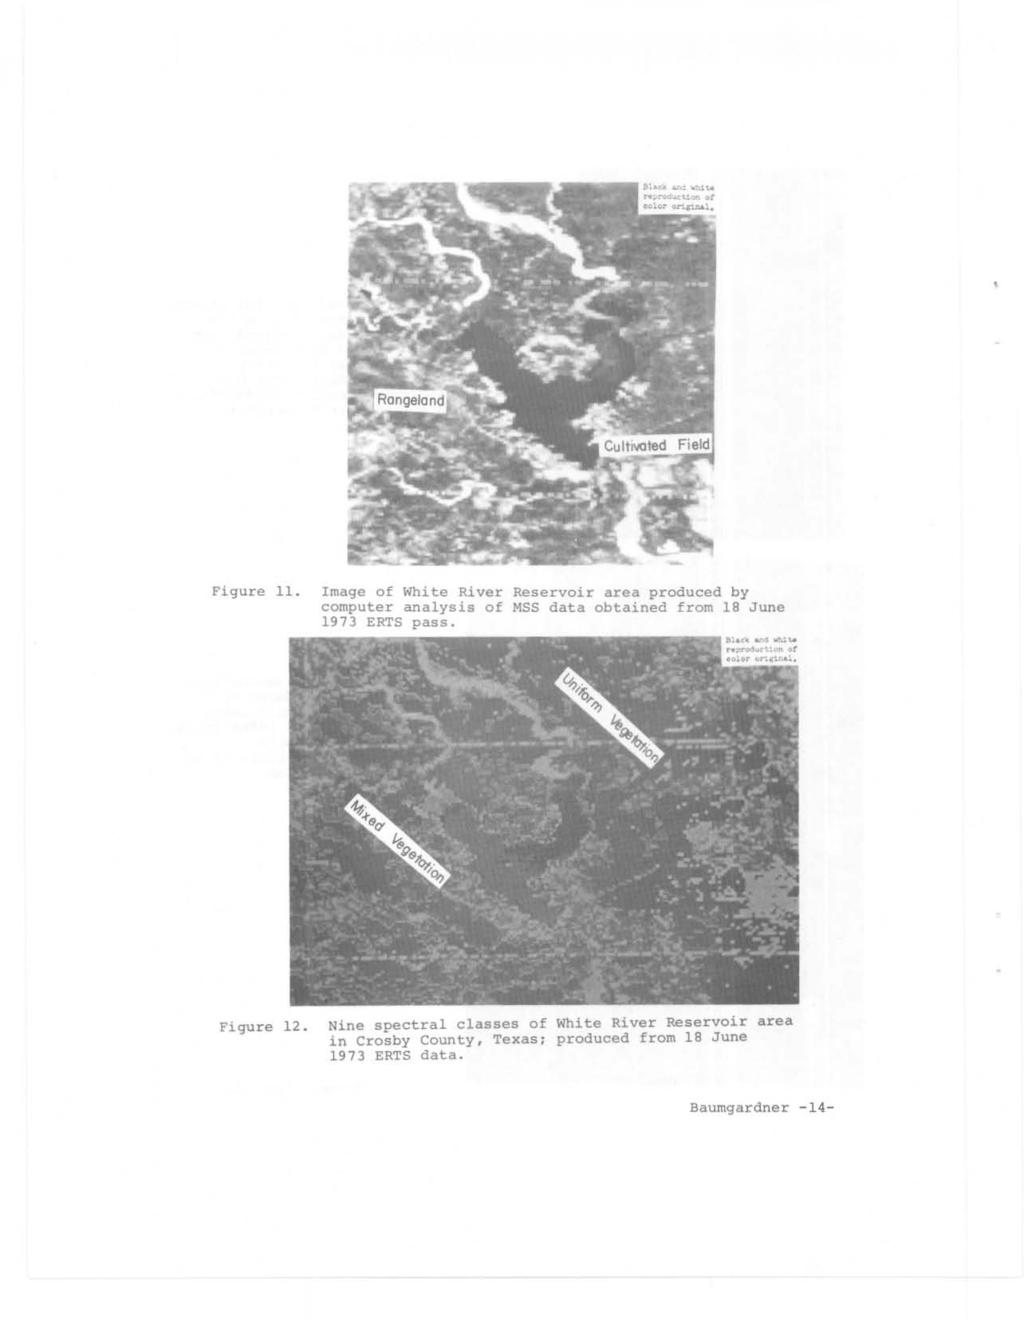 , Figure 11. Image of White River Reservoir area produced by computer analysis of MSS data obtained from 18 June 1973 ERTS pass.